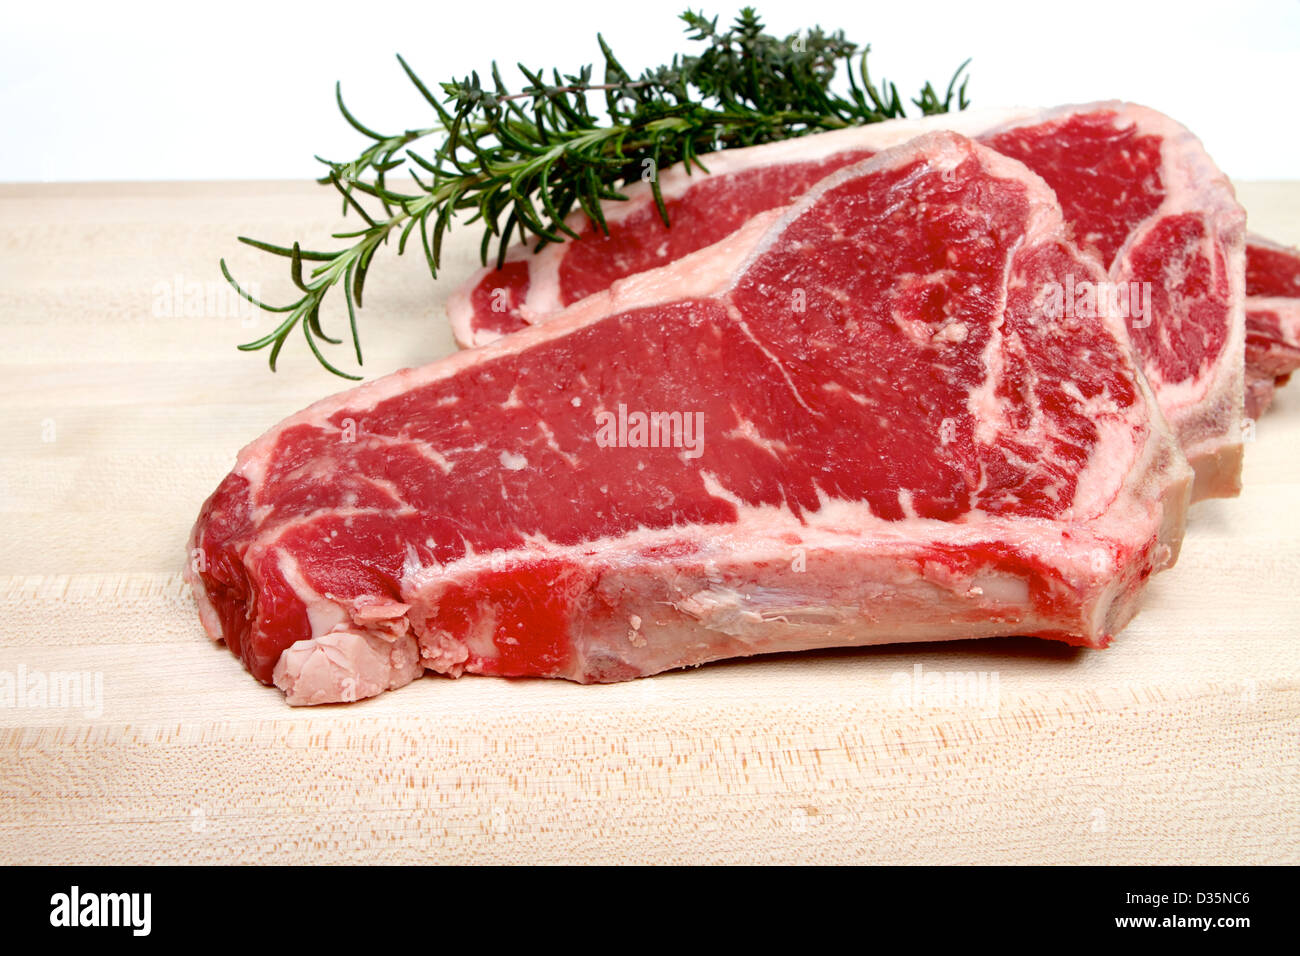 New York Strip Steak High Resolution Stock Photography and Images - Alamy